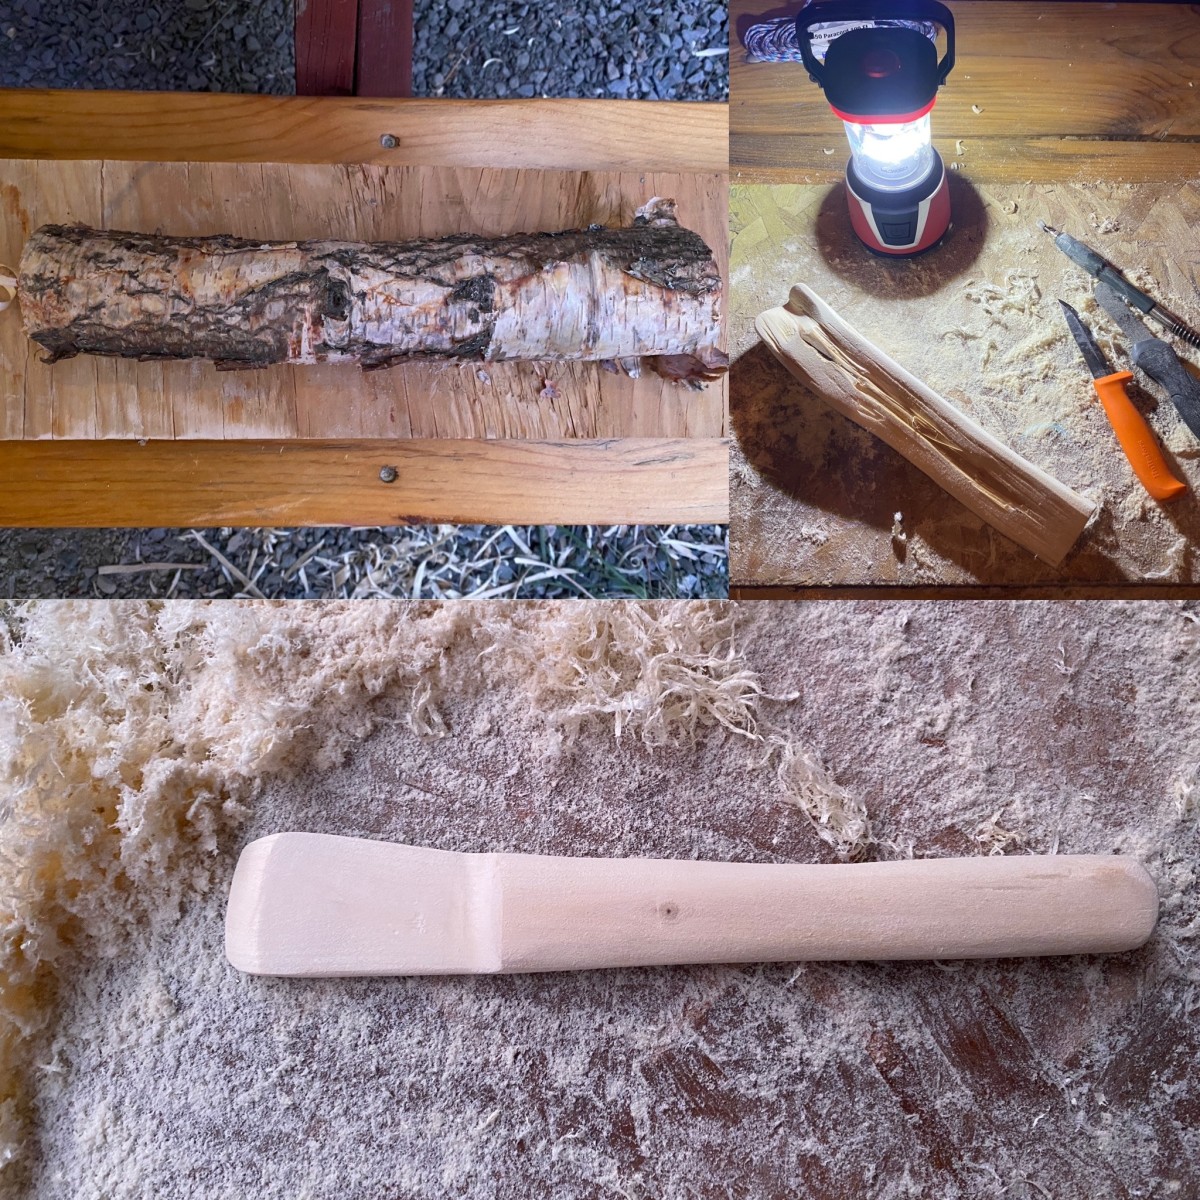 amateur-hobby-wood-carving